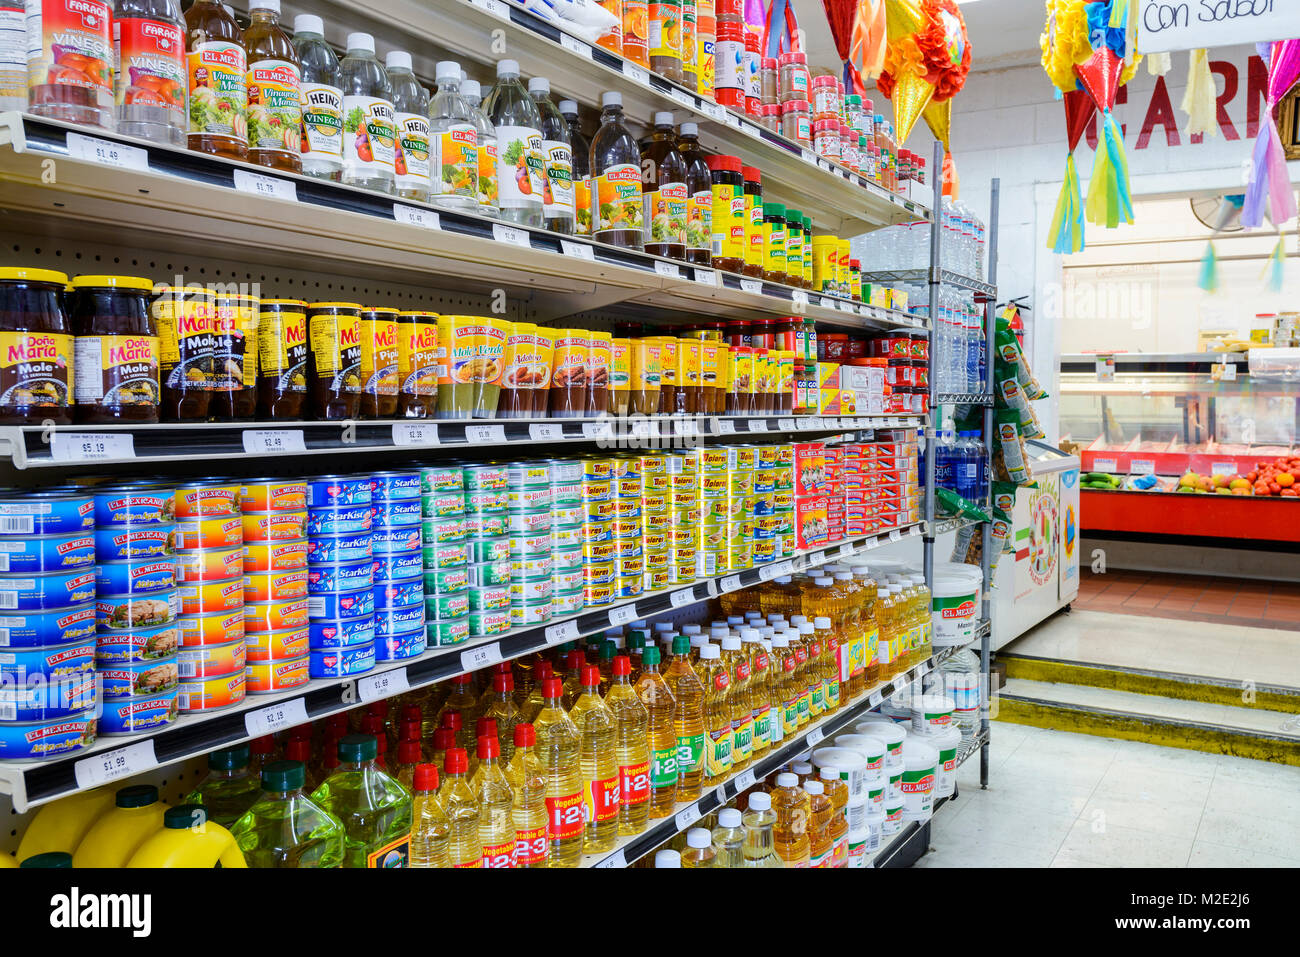 Food on shelves of grocery store Stock Photo